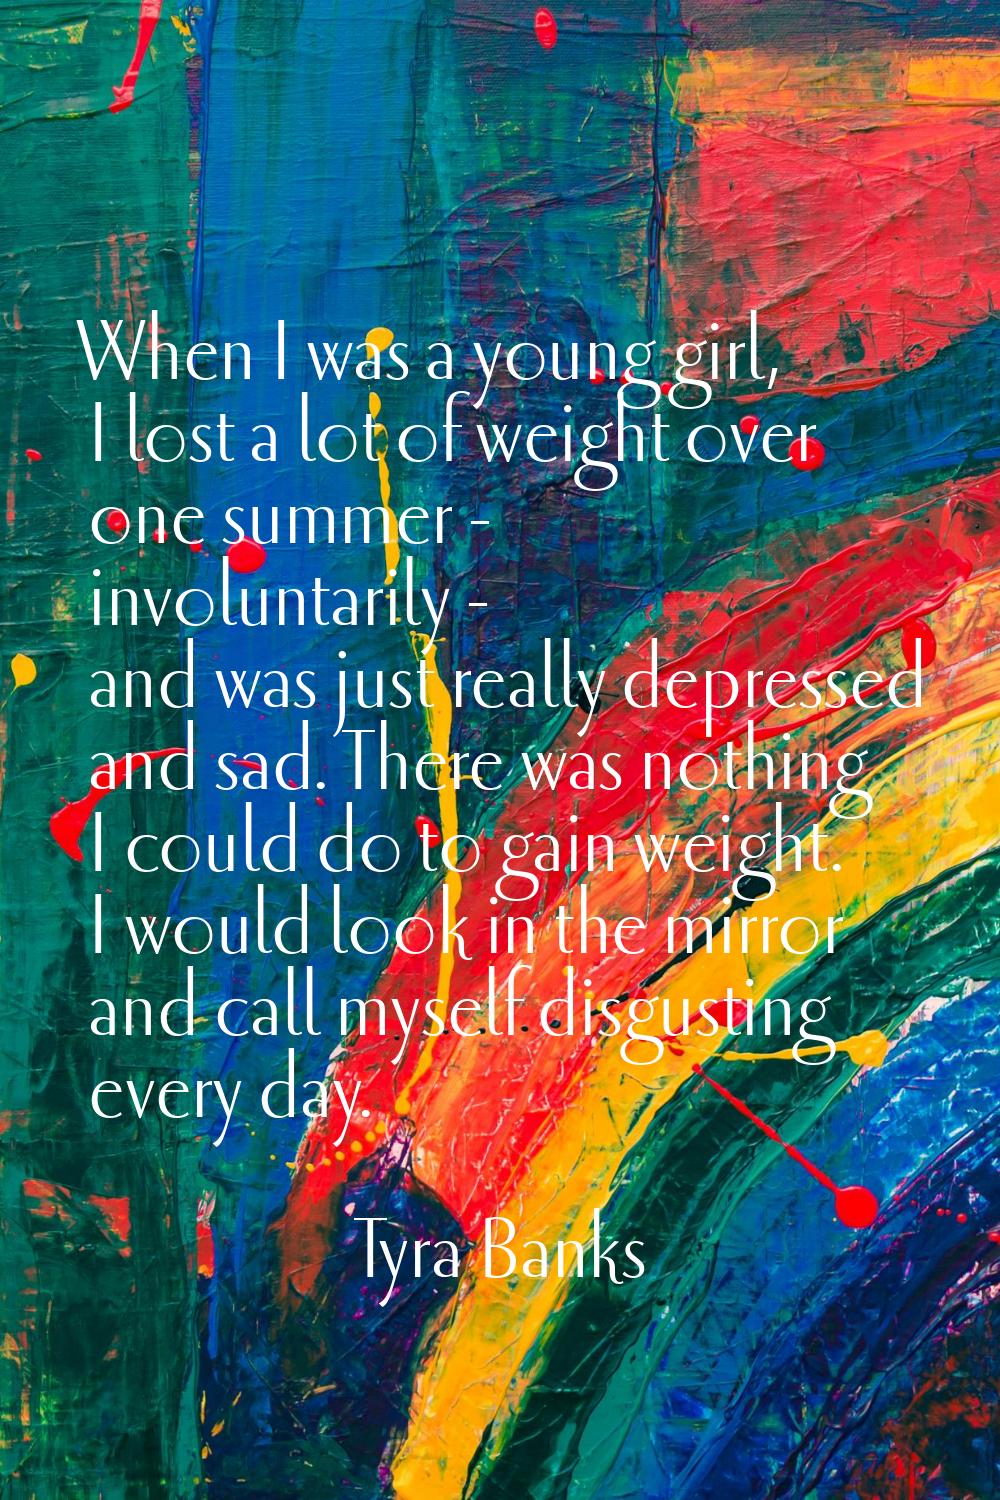 When I was a young girl, I lost a lot of weight over one summer - involuntarily - and was just real